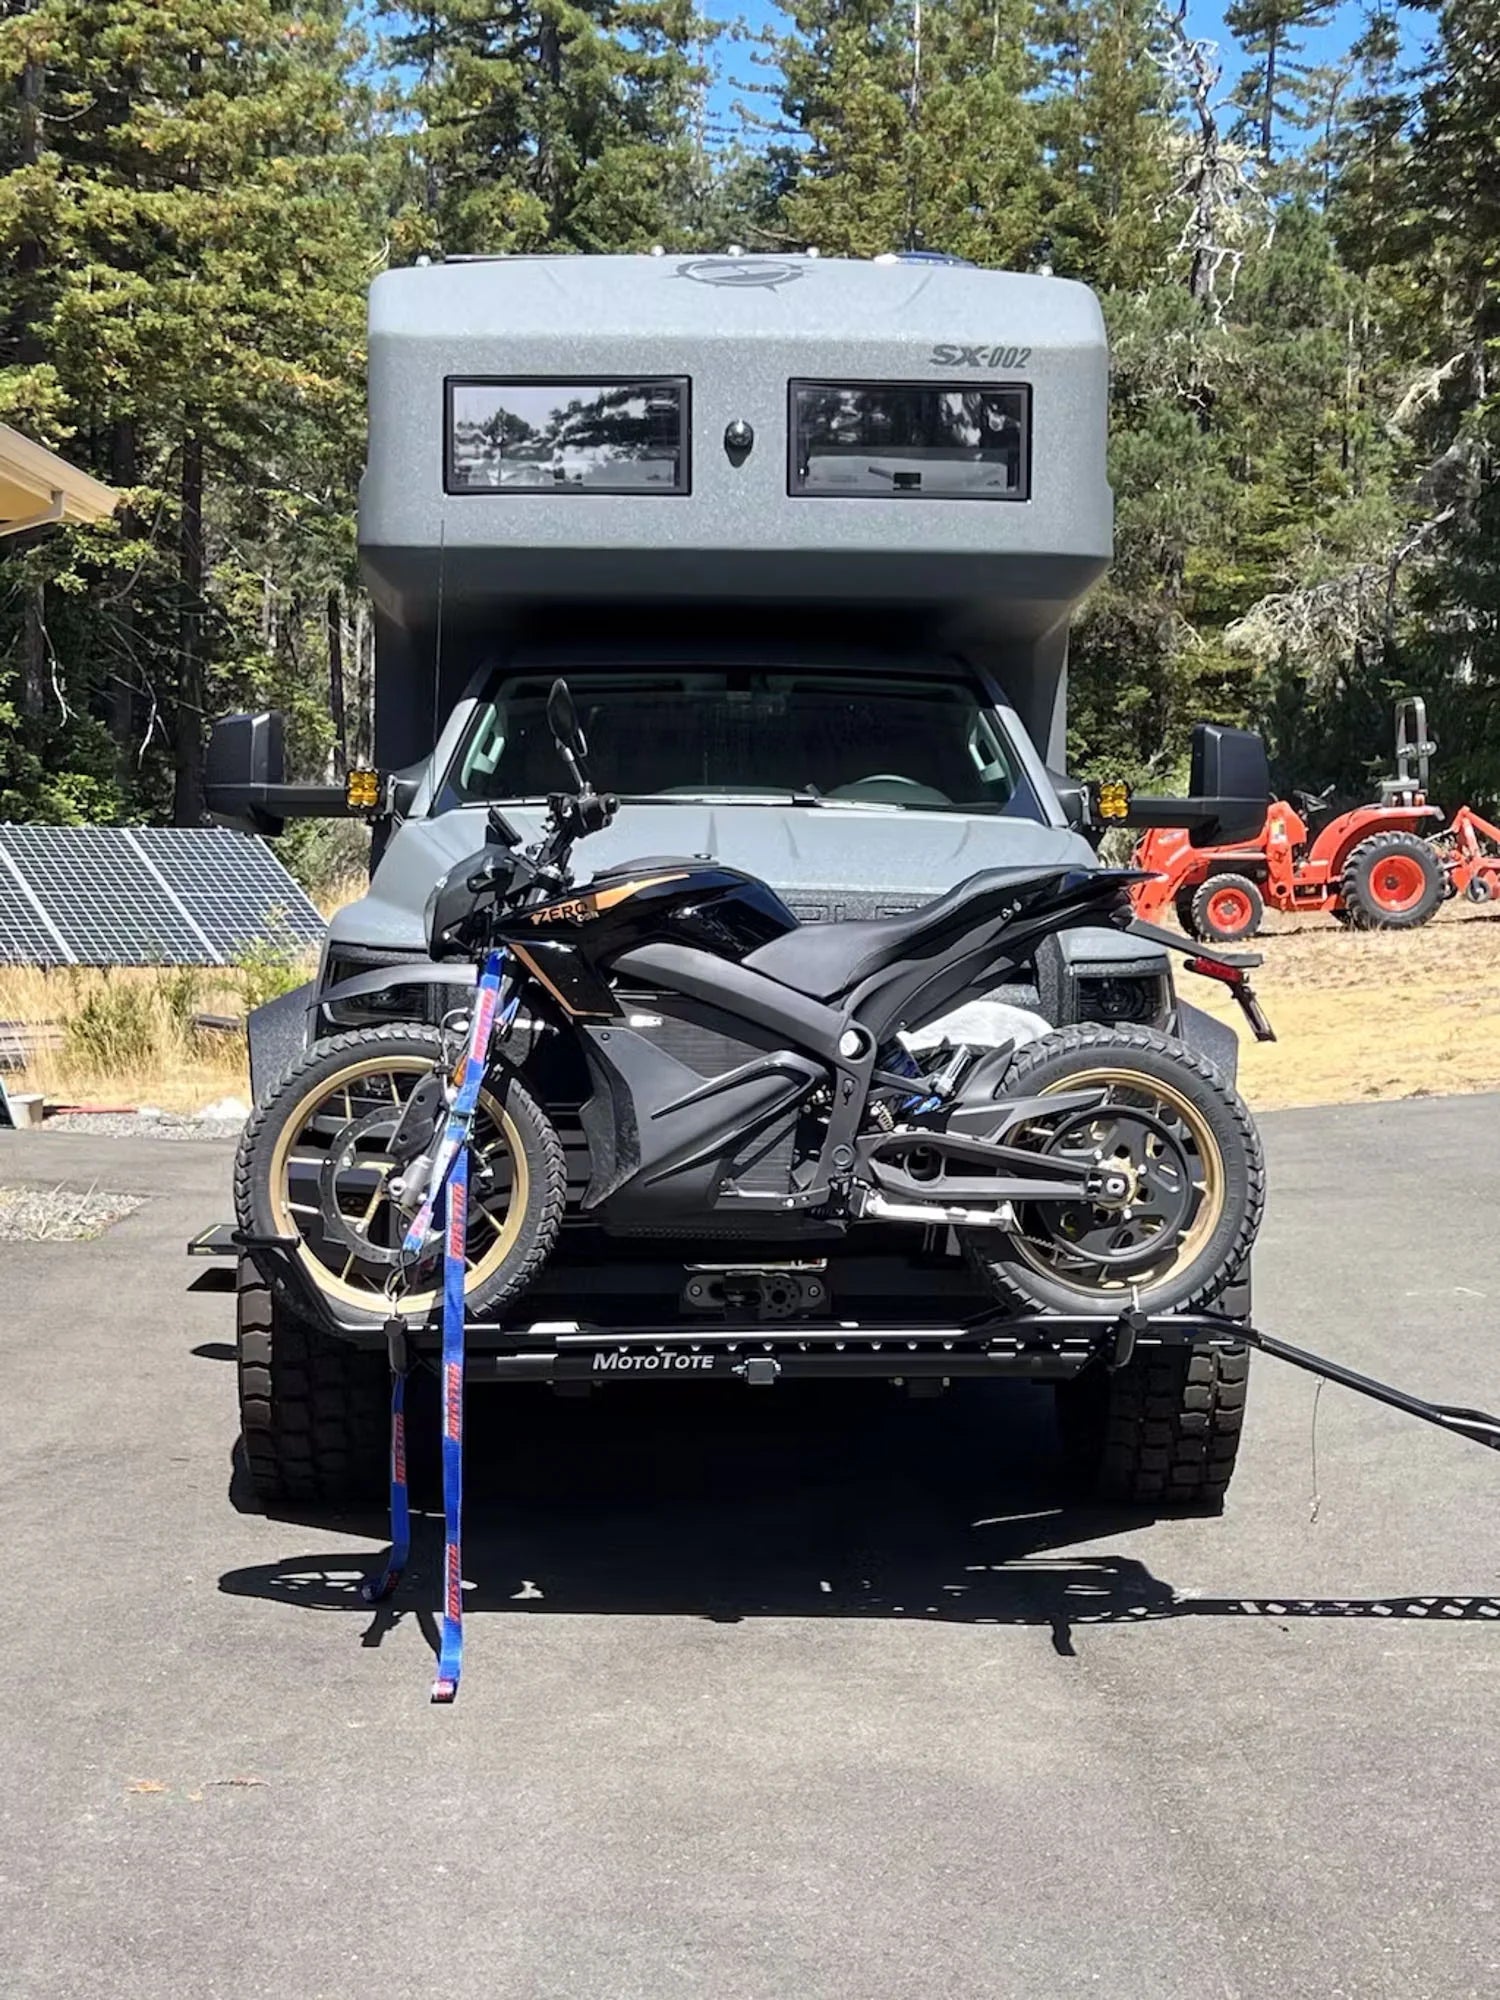 7 Motorcycle Carrier ideas  motorcycle carrier, motorcycle